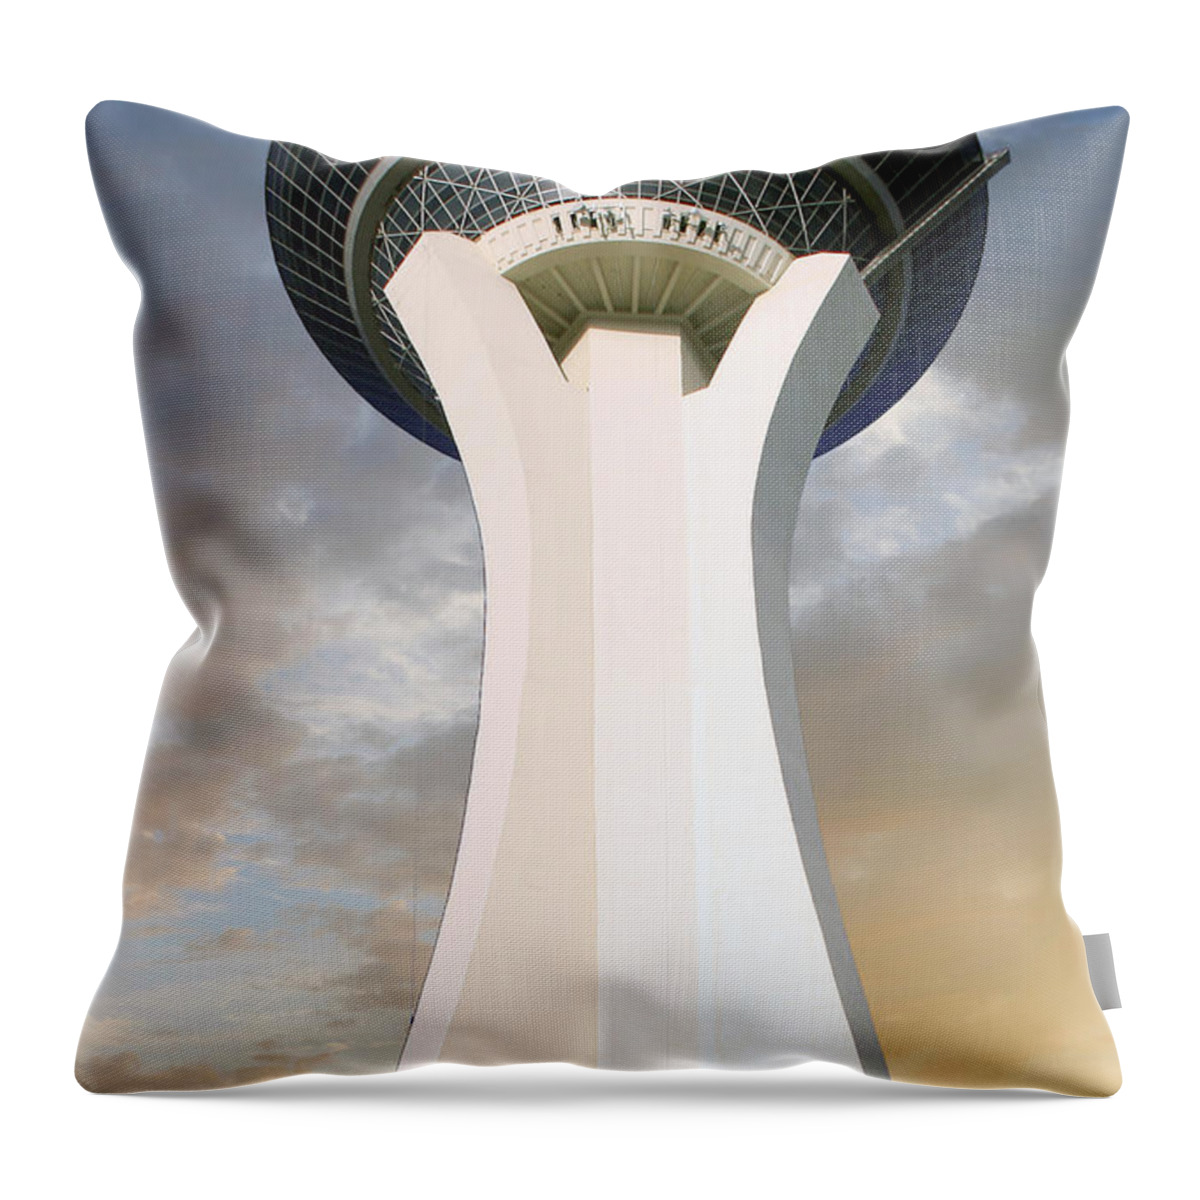 Strat Throw Pillow featuring the photograph Strat Skytower Vegas by Chris Smith